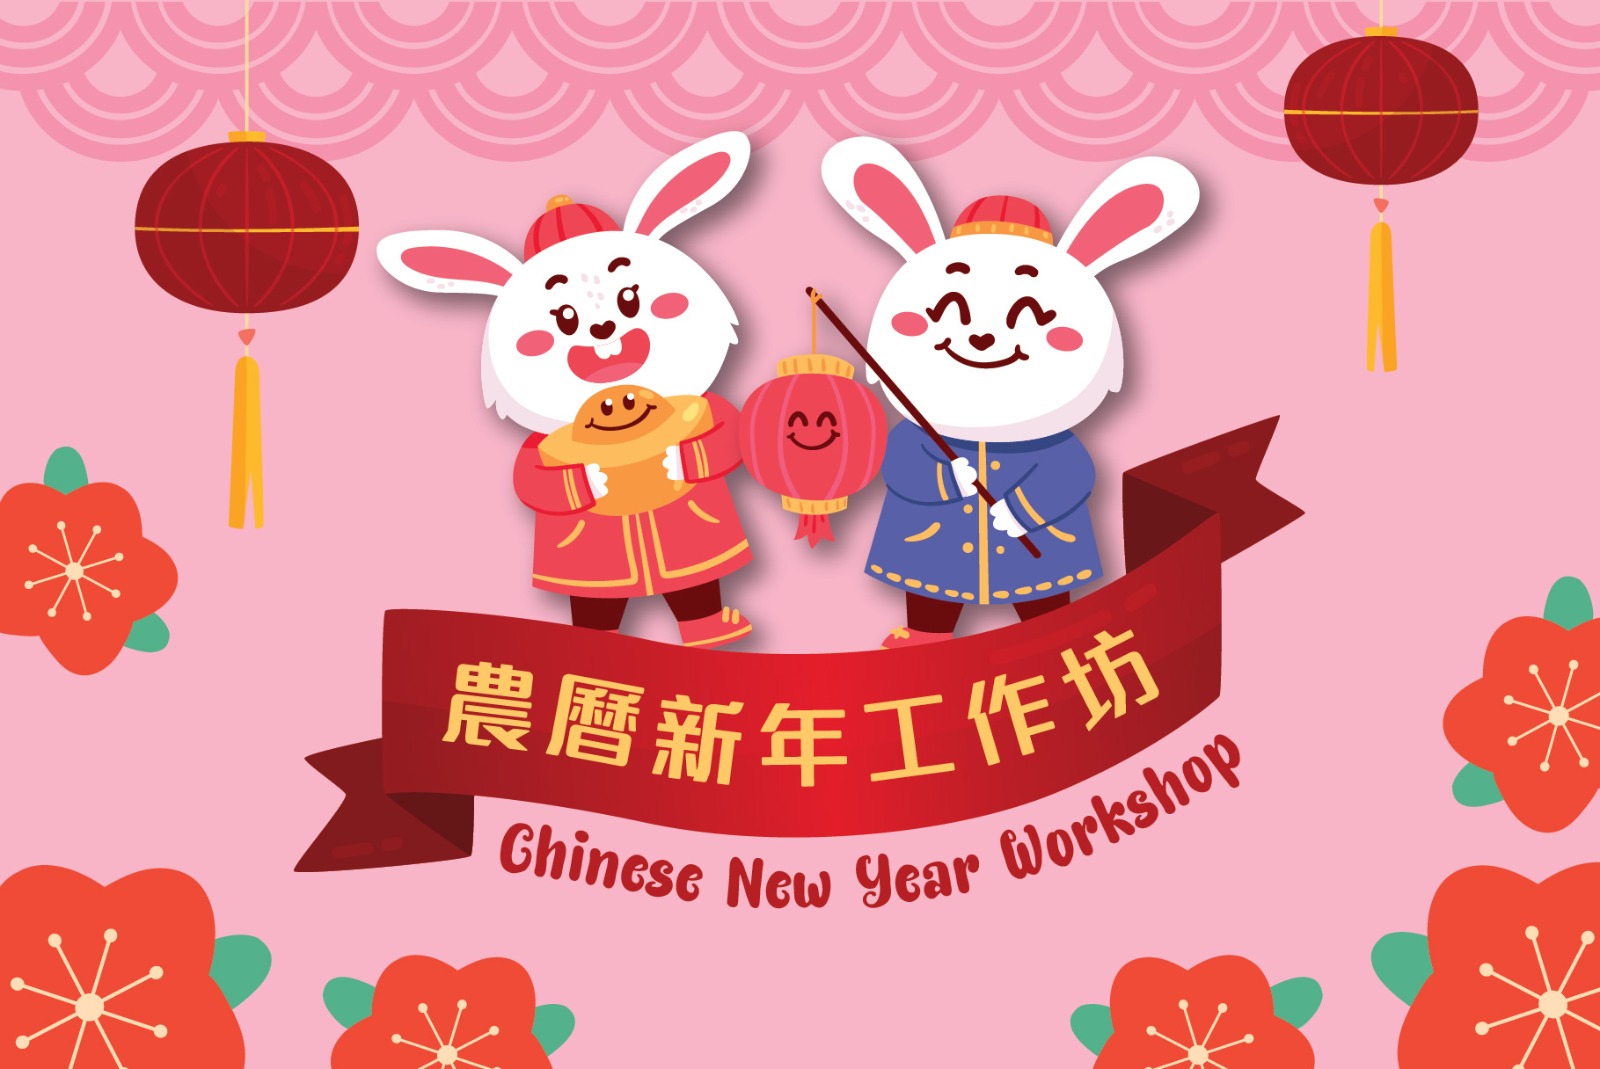 【20230112】Little Cosmos Chinese New Year Workshop 2023